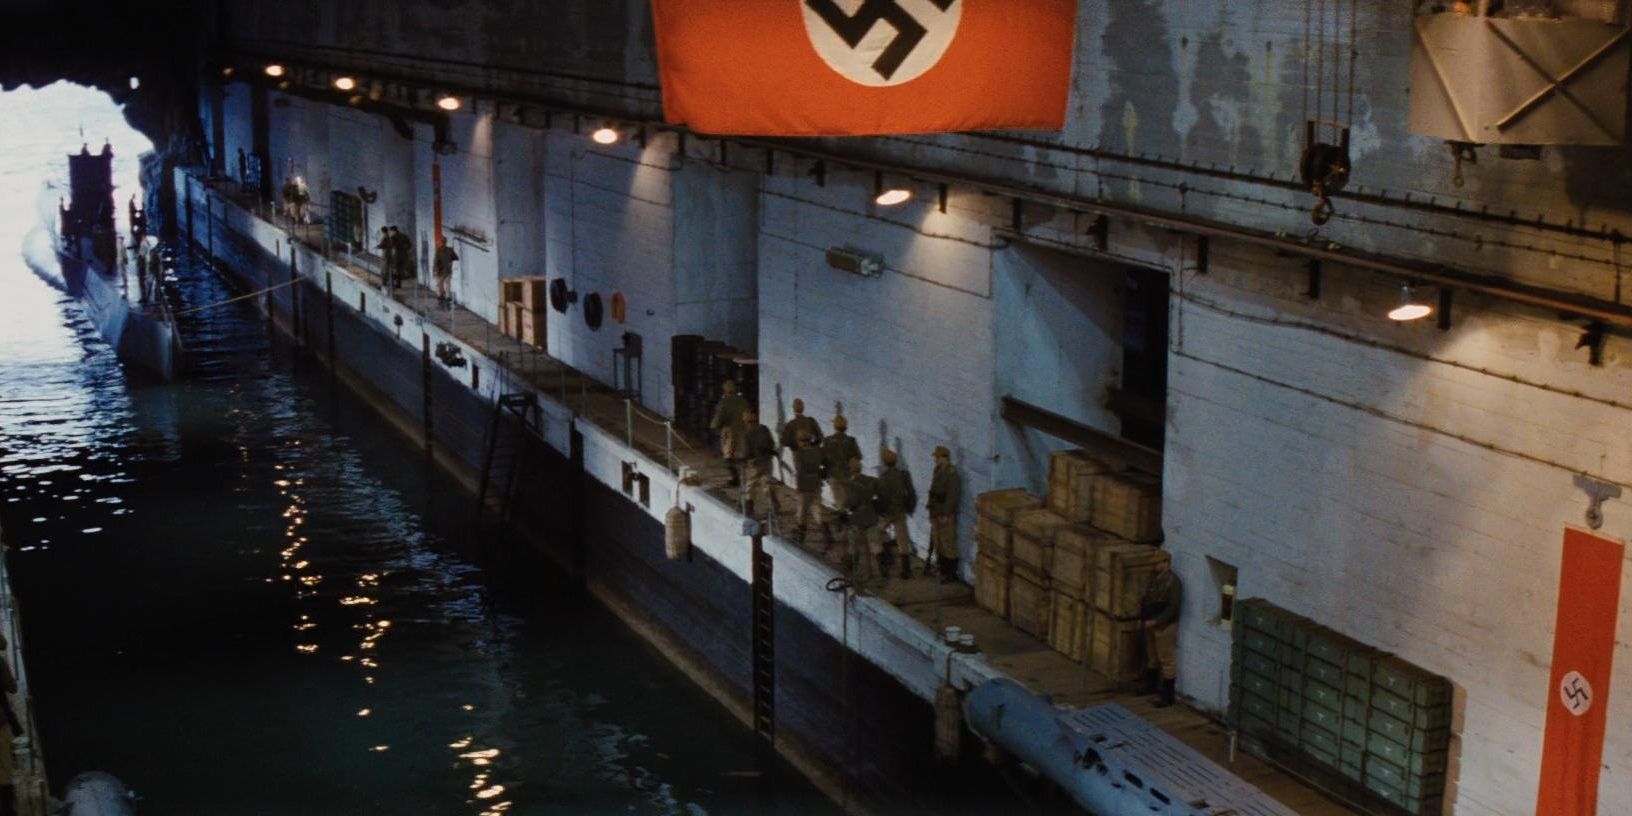 The_German_submarine_in_Raiders_of_the_Lost_Ark